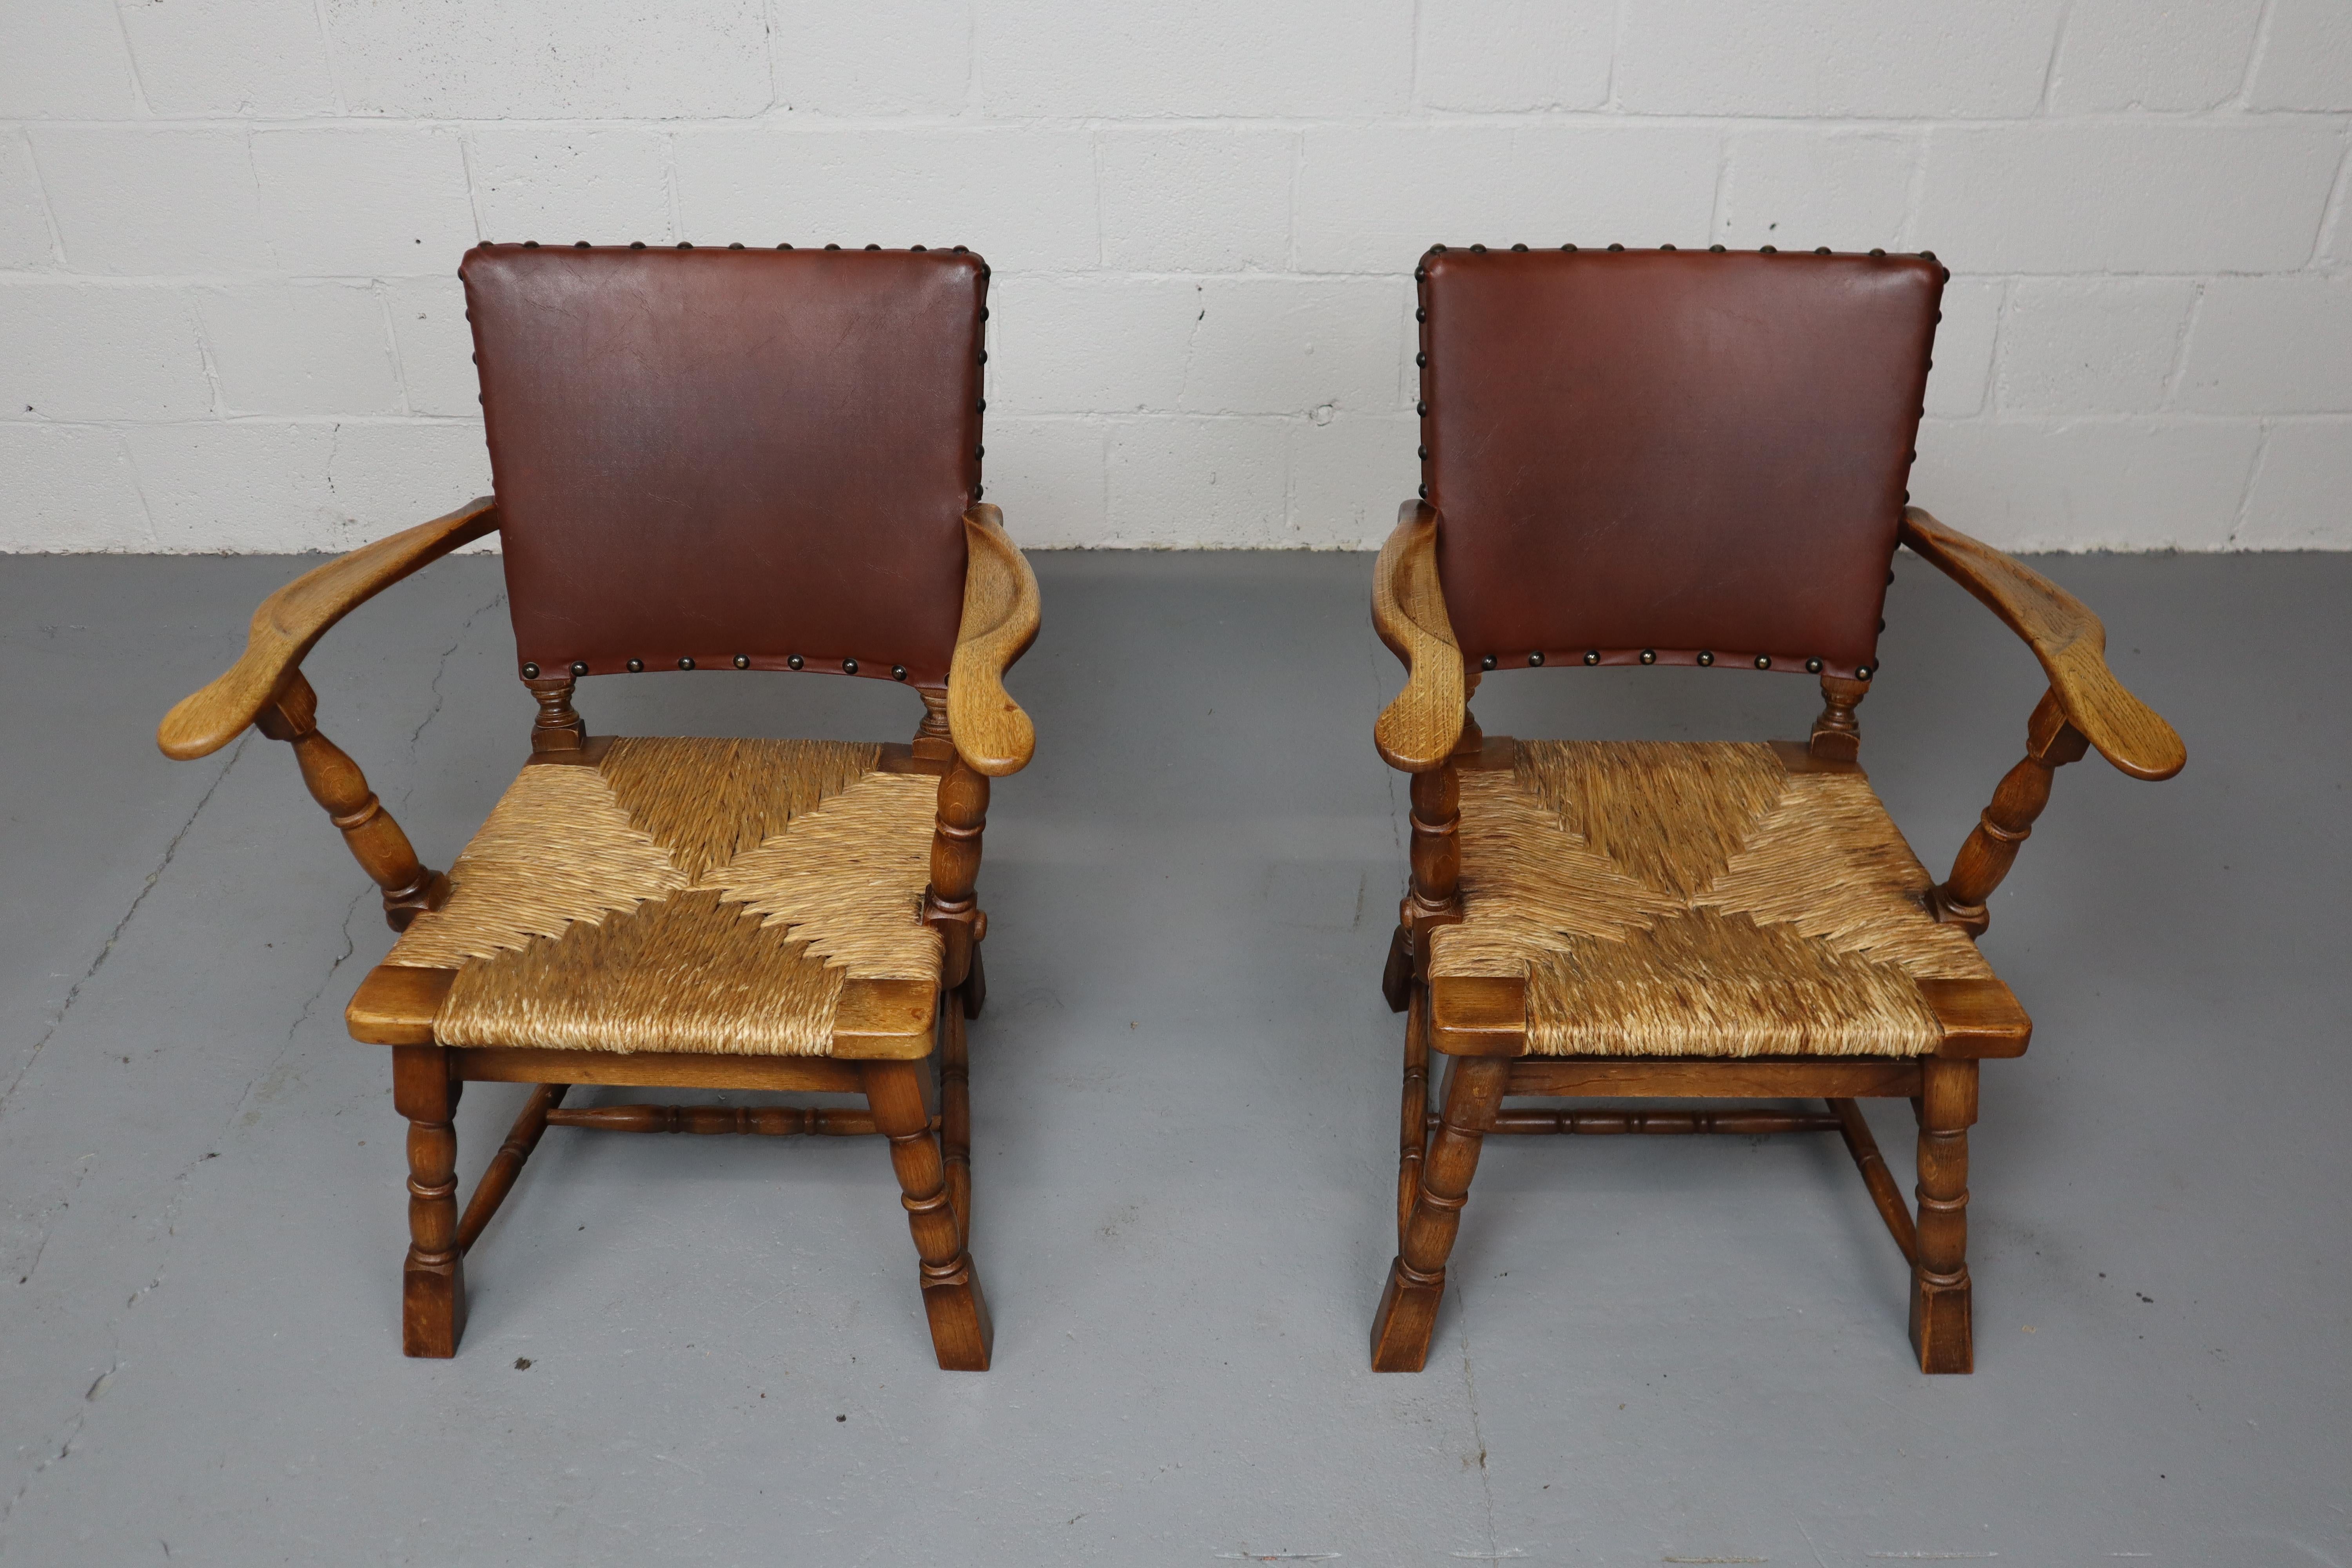 Pair of rush and oak armchairs by De Ster Gelderland, Netherlands 1950's.
The original brand labels are still attached! 